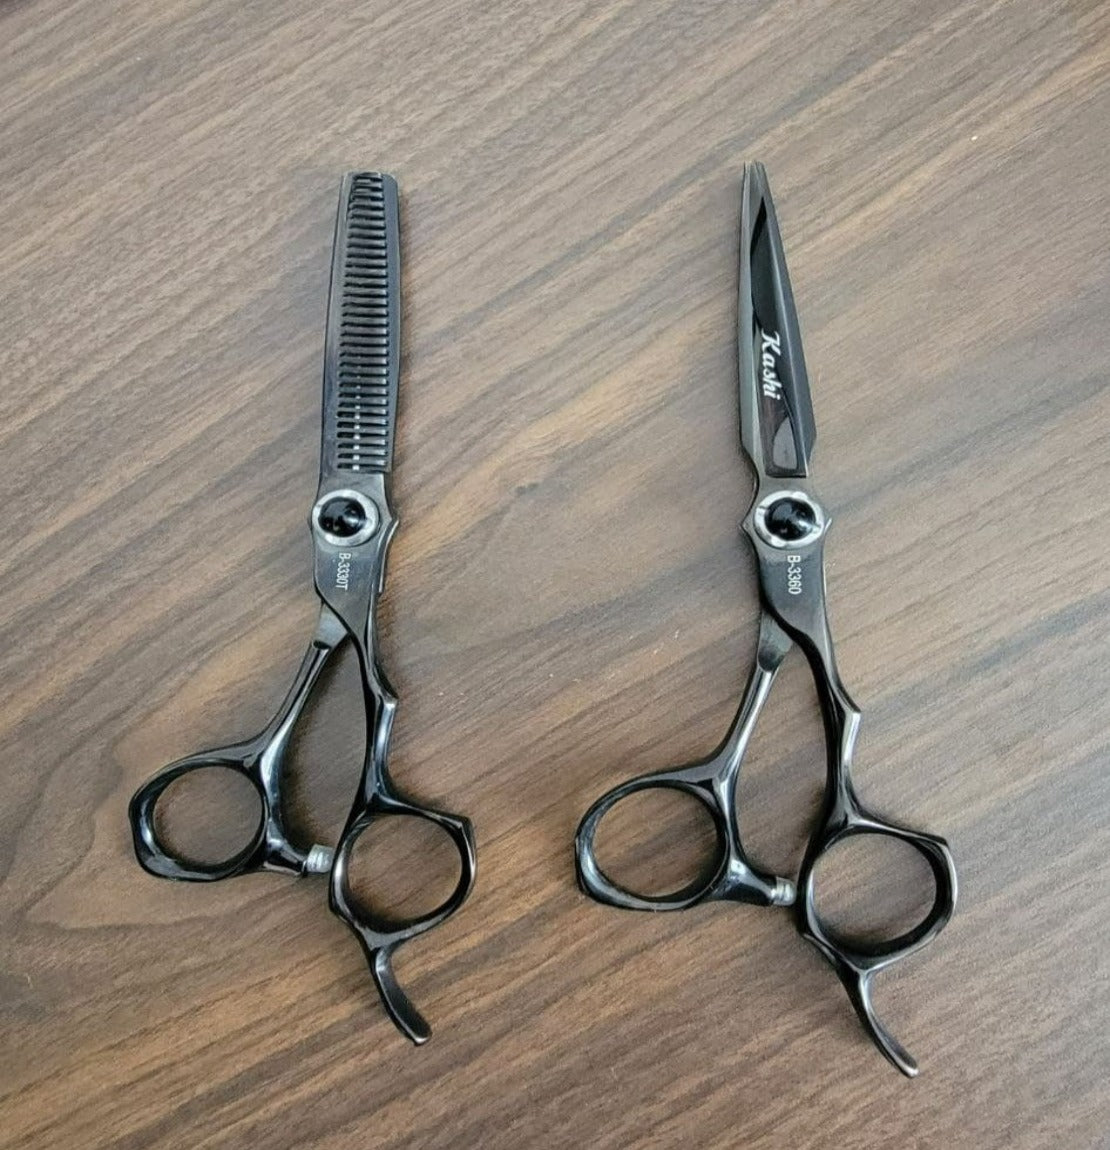 Kashi Professional Shears, Hair Cutting 6 &quot;and Thinning Shears 6&quot; 30 teeth, Japanese Stainless Steel, Black Color